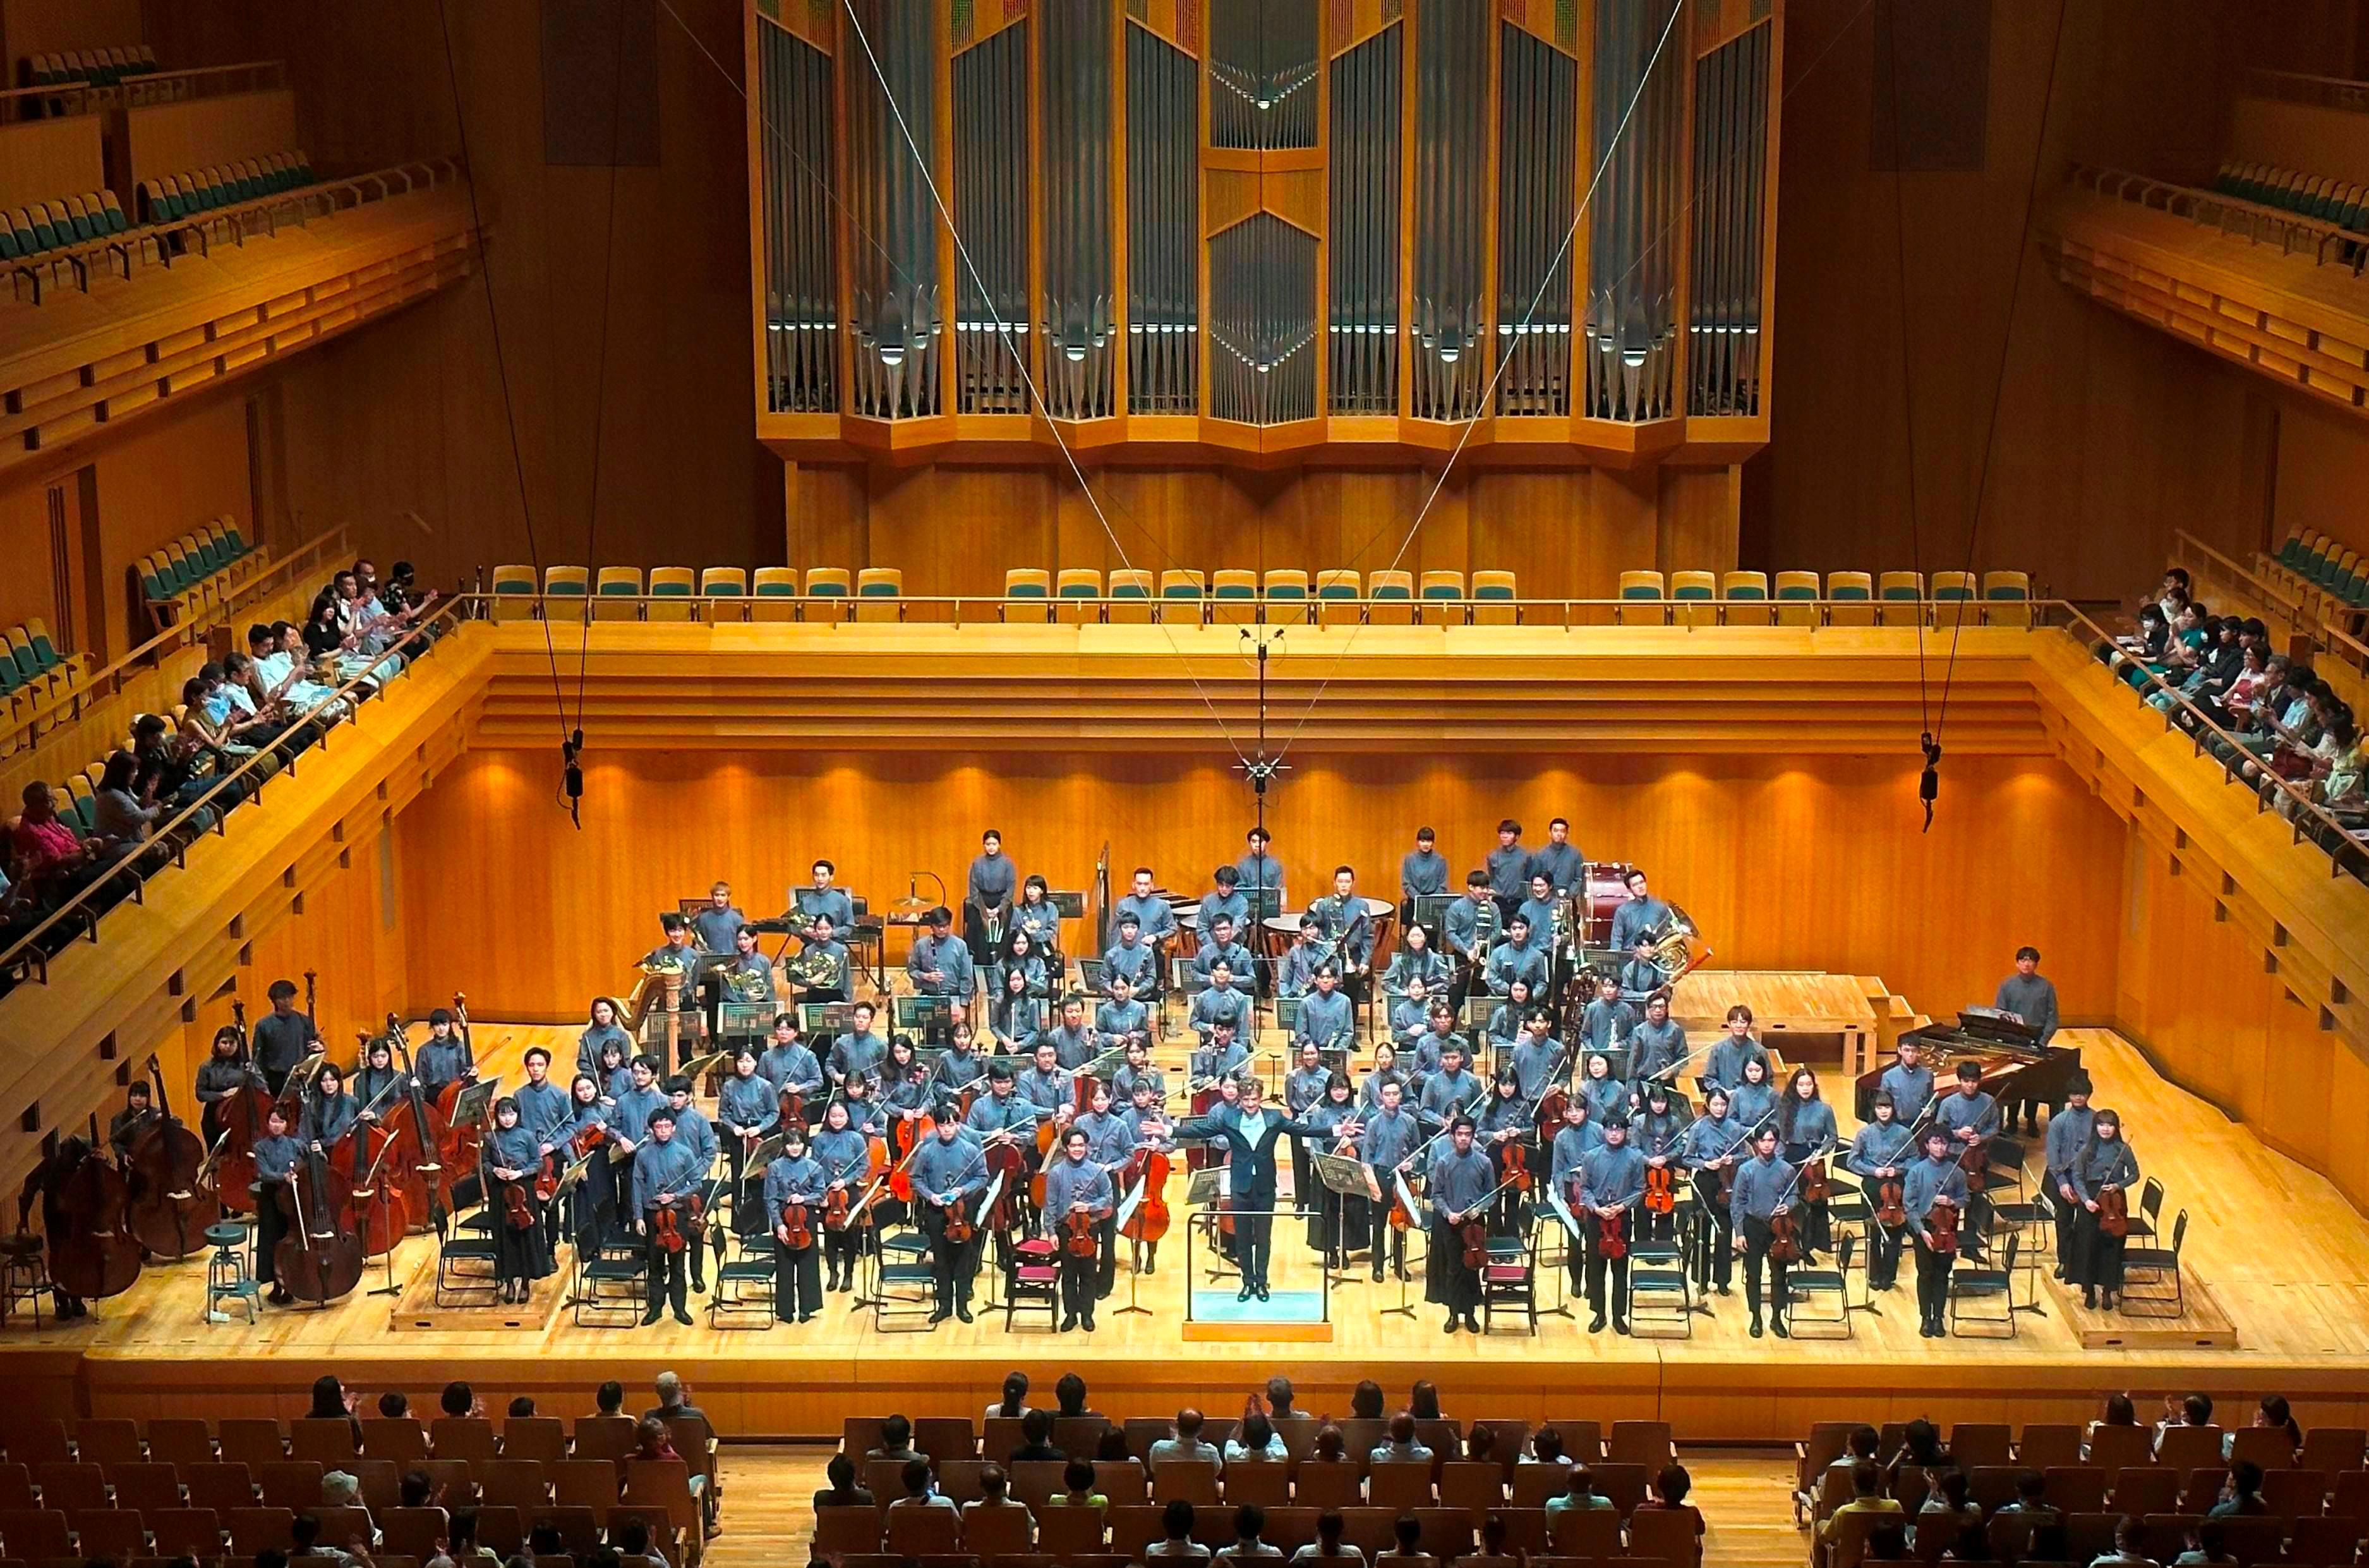 The Asian Youth Orchestra performed two concerts at the Tokyo Opera City Concert Hall in Tokyo, Japan, yesterday and today (August 30 and 31).